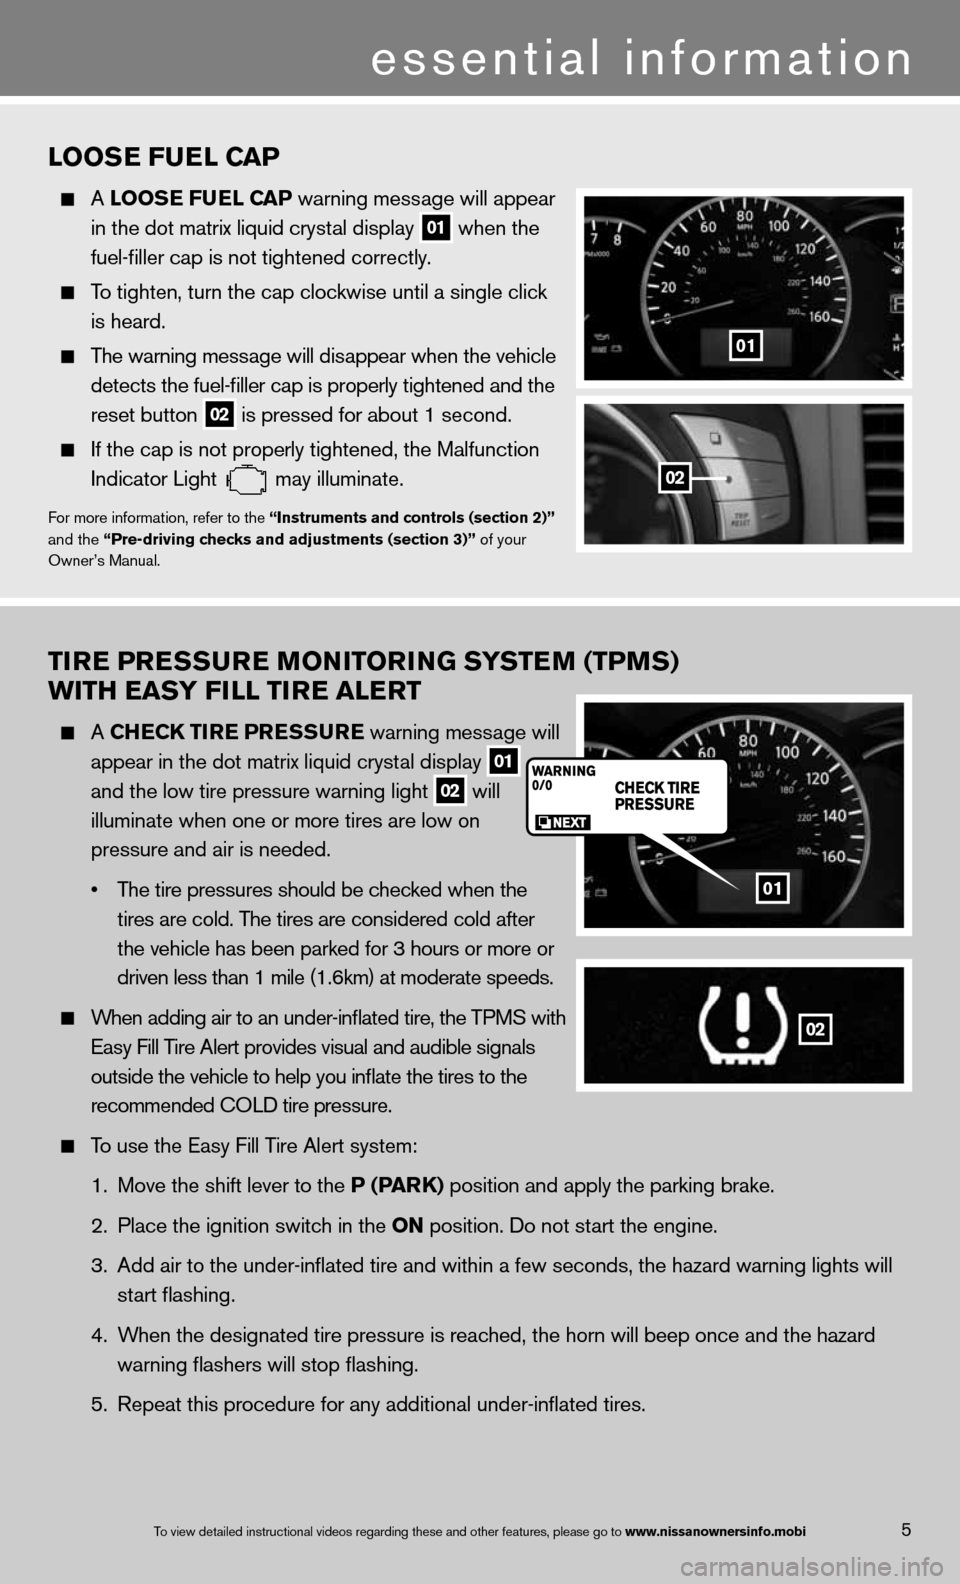 NISSAN QUEST 2013 RE52 / 4.G Quick Reference Guide TIre Pre SSure MONITOr ING SYSTeM (TPMS) 
wITH eaSY FILL TI re aLerT
  A  CHe CK TIre P reSSure warning message will 
    appear in the dot matrix liquid crystal display
 
01  
   and the low tire pre